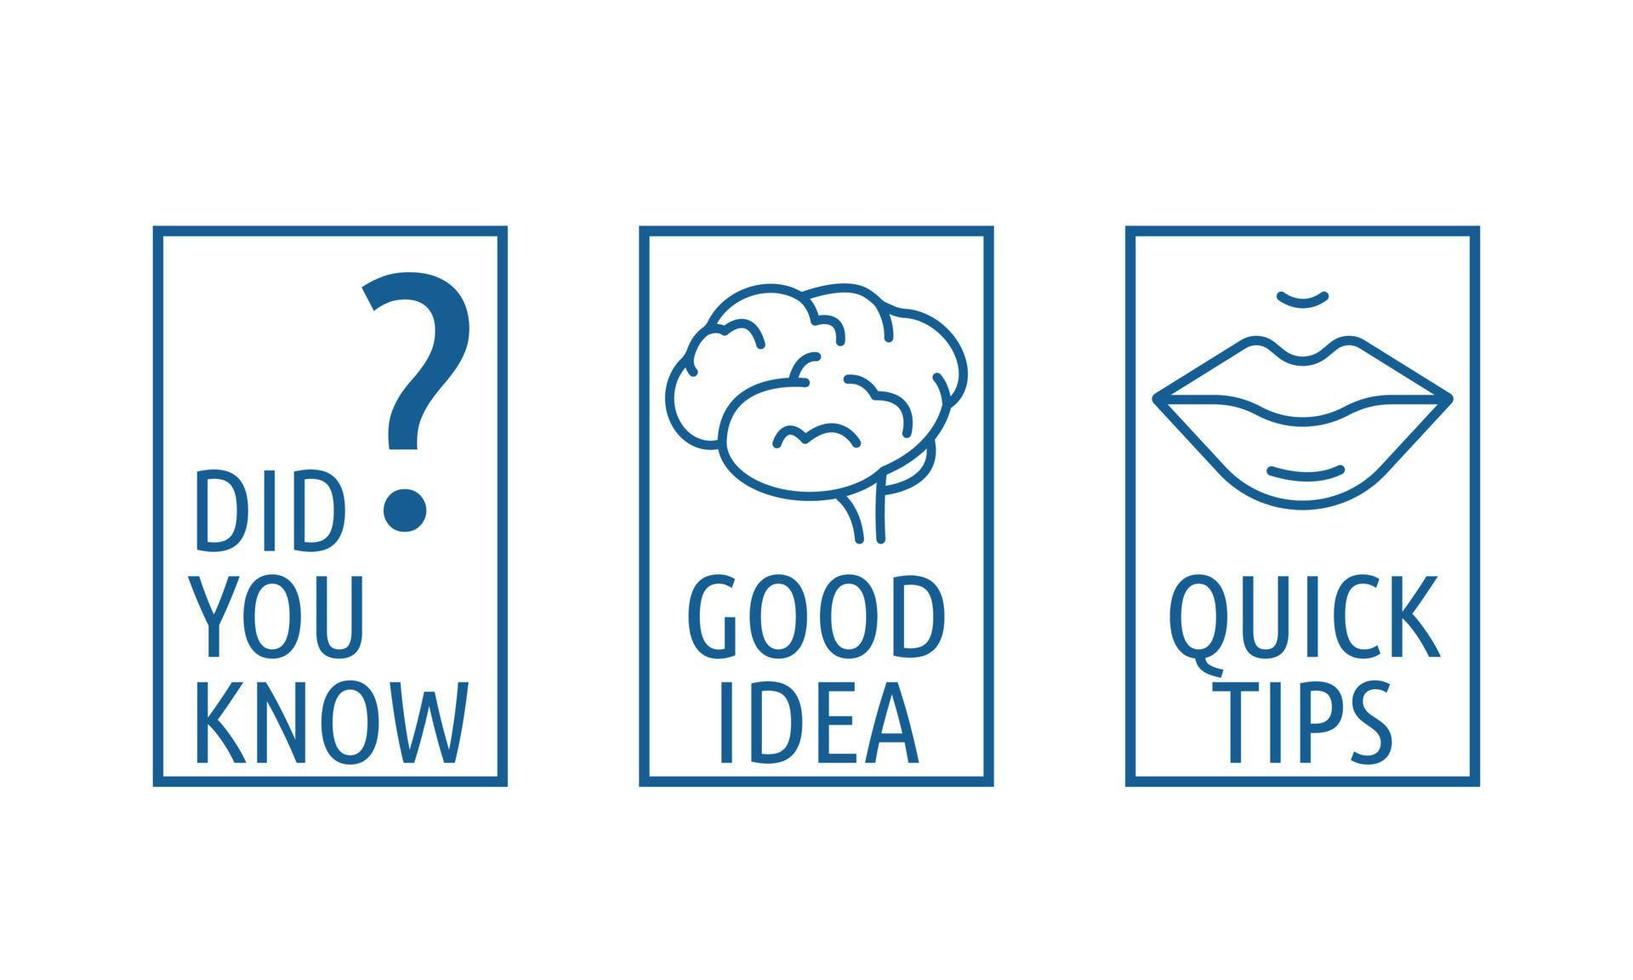 Did you know question sticker. Quick tips line icon. Good idea button. Advice informational concept. Vector illustration on white background